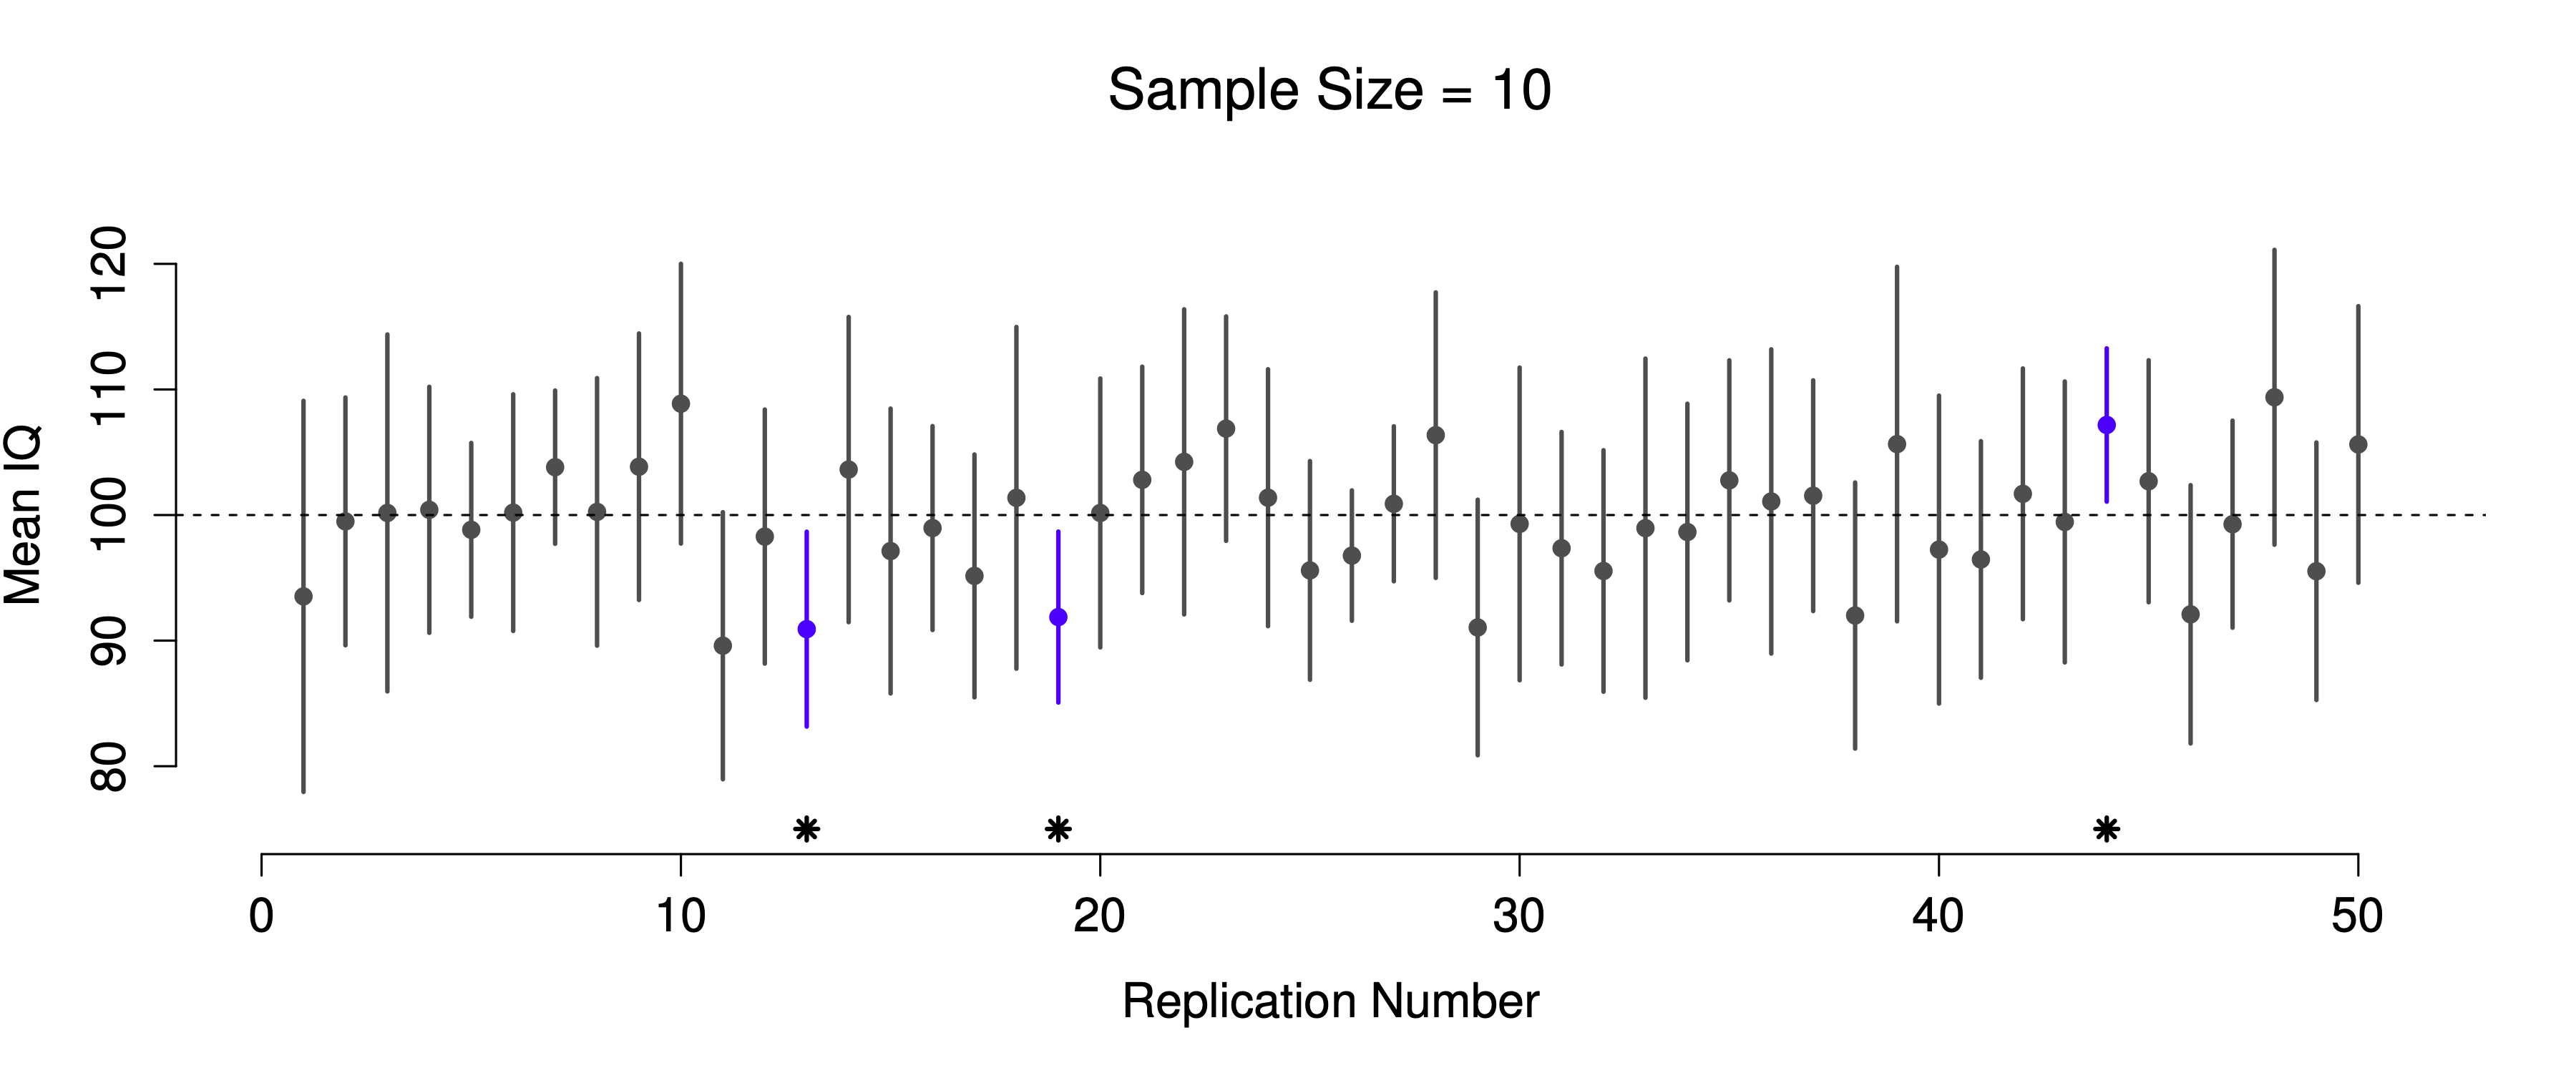 95% confidence intervals. The top (panel a) shows 50 simulated replications of an experiment in which we measure the IQs of 10 people. The dot marks the location of the sample mean, and the line shows the 95% confidence interval. In total 47 of the 50 confidence intervals do contain the true mean (i.e., 100), but the three intervals marked with asterisks do not. The lower graph (panel b) shows a similar simulation, but this time we simulate replications of an experiment that measures the IQs of 25 people.